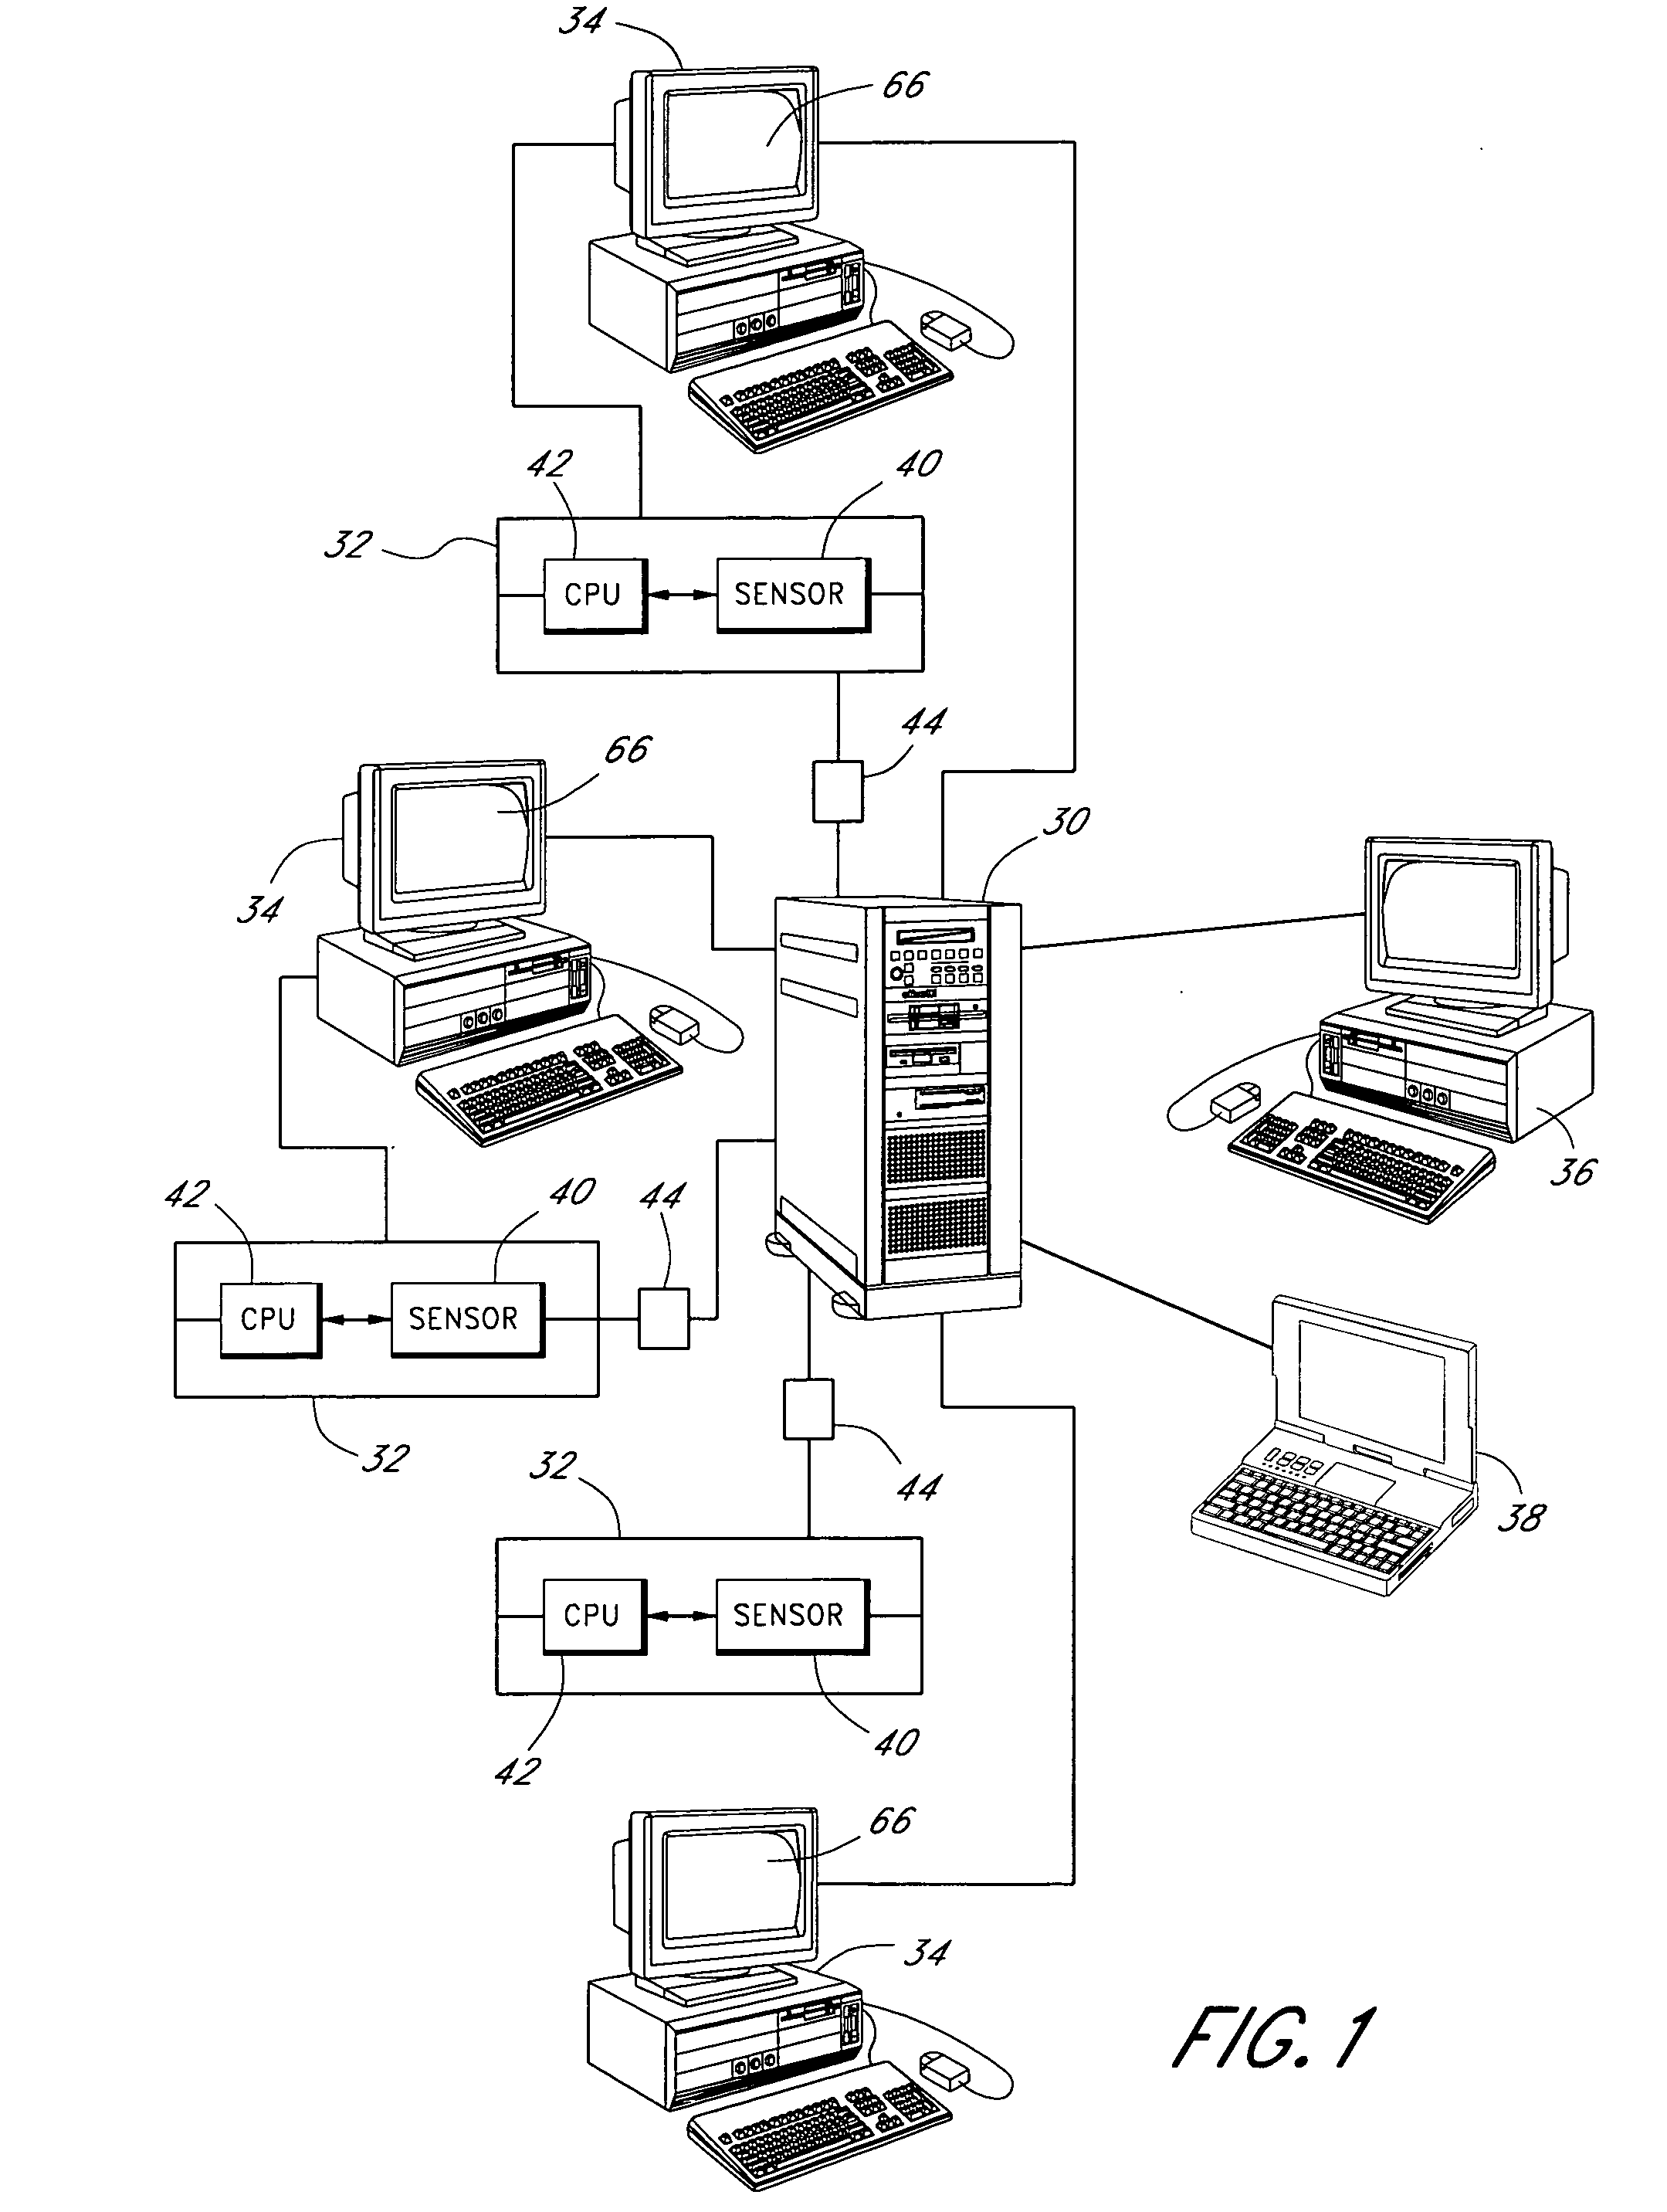 System and method for monitoring and responding to device conditions